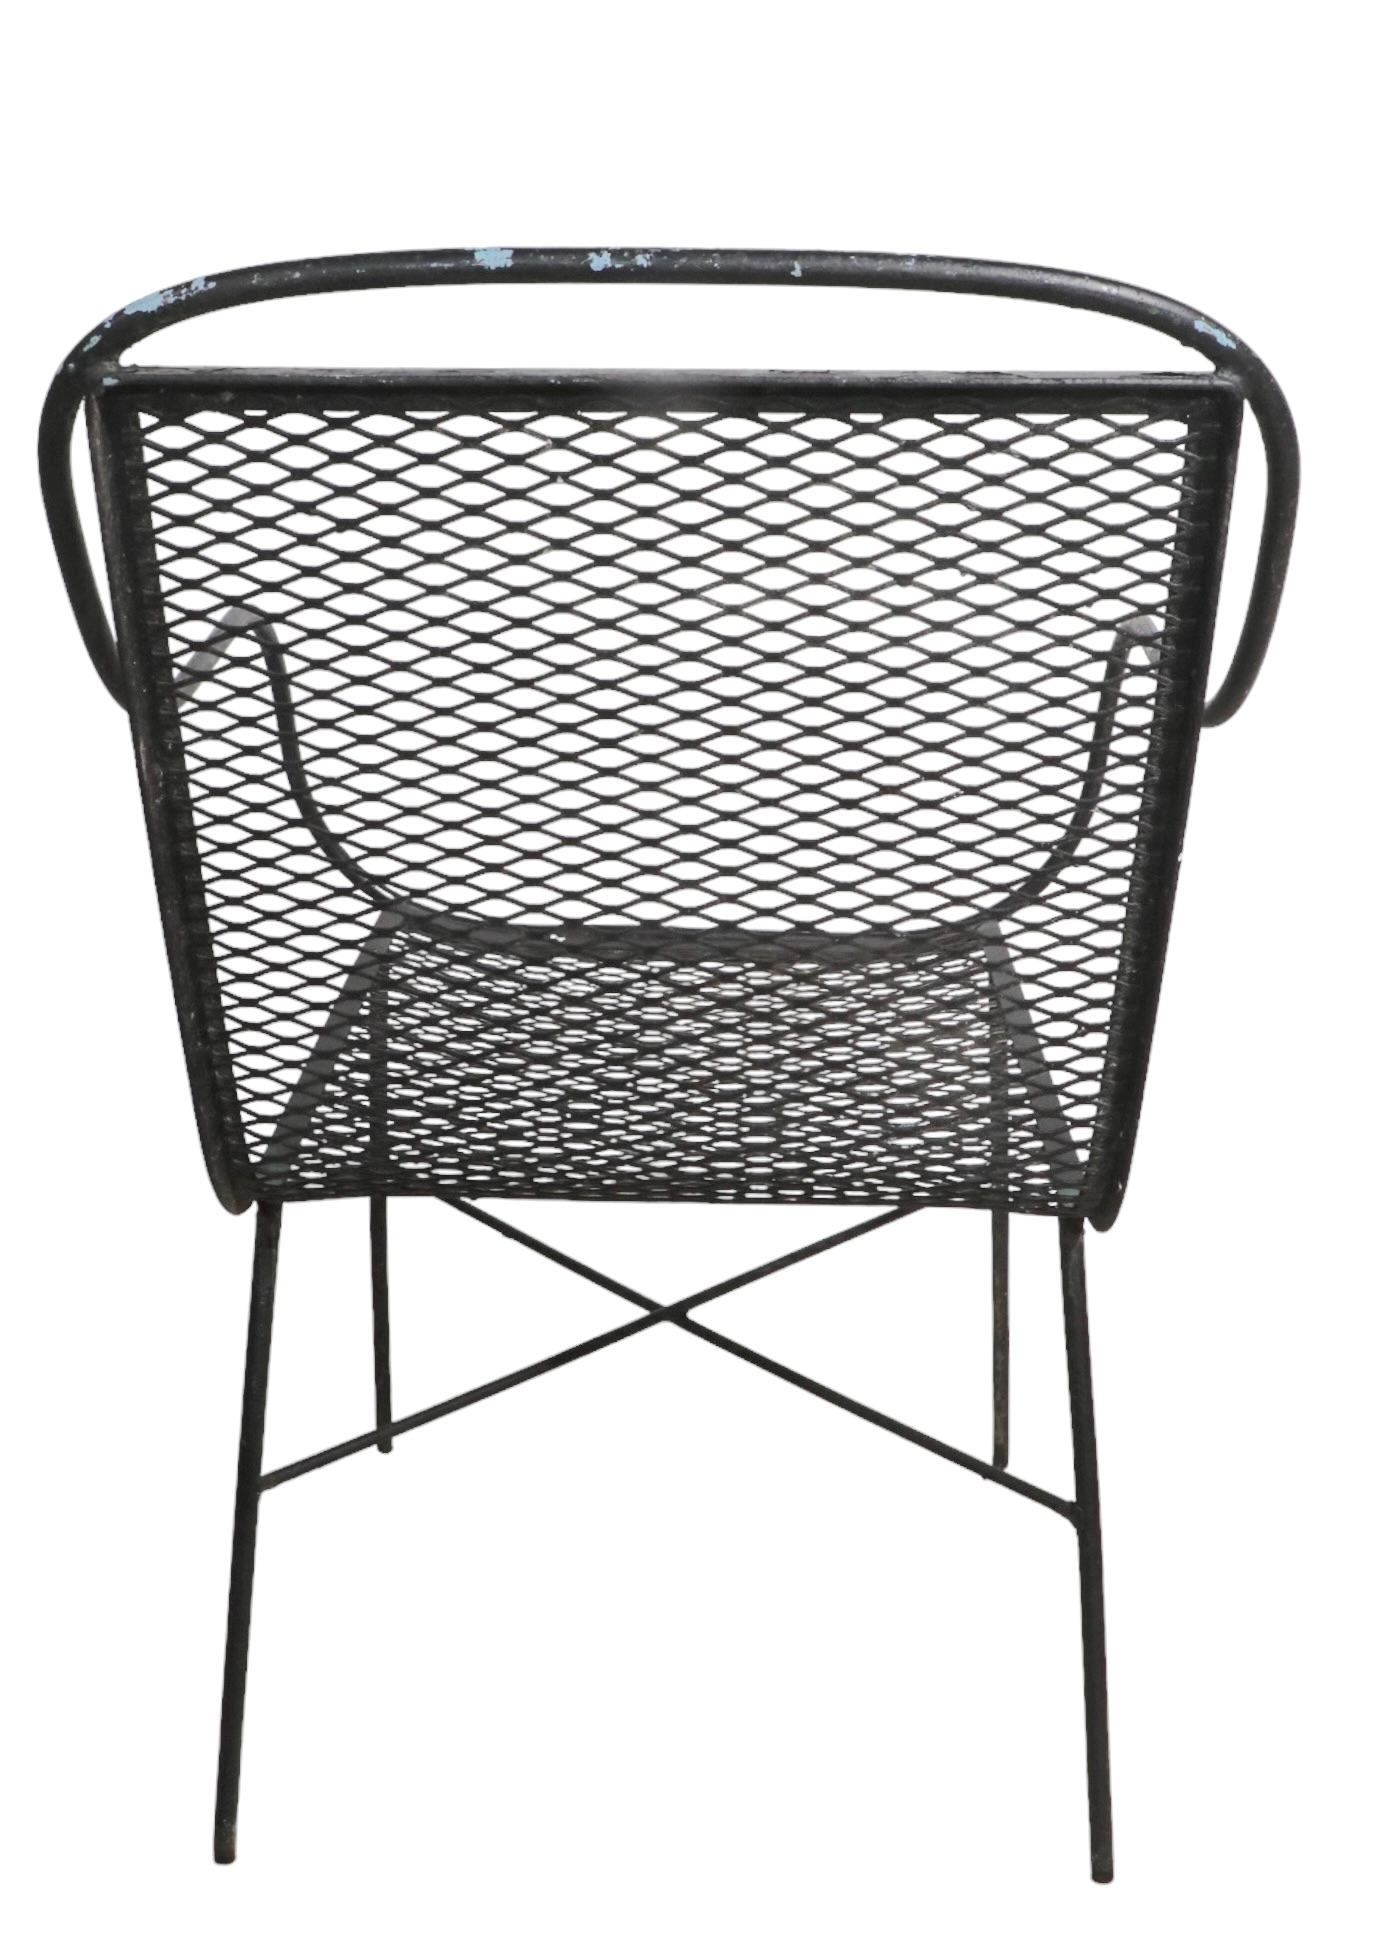 Chic architectural wrought iron arm chair, with metal mesh seat and back. The chair is in very good, original condition, clean and ready to use. 
 Total H 31.5 x Arm H 24.5 x Seat H 17 x W 21.5 x D 20 inches. 
 Measures: Please view our extensive